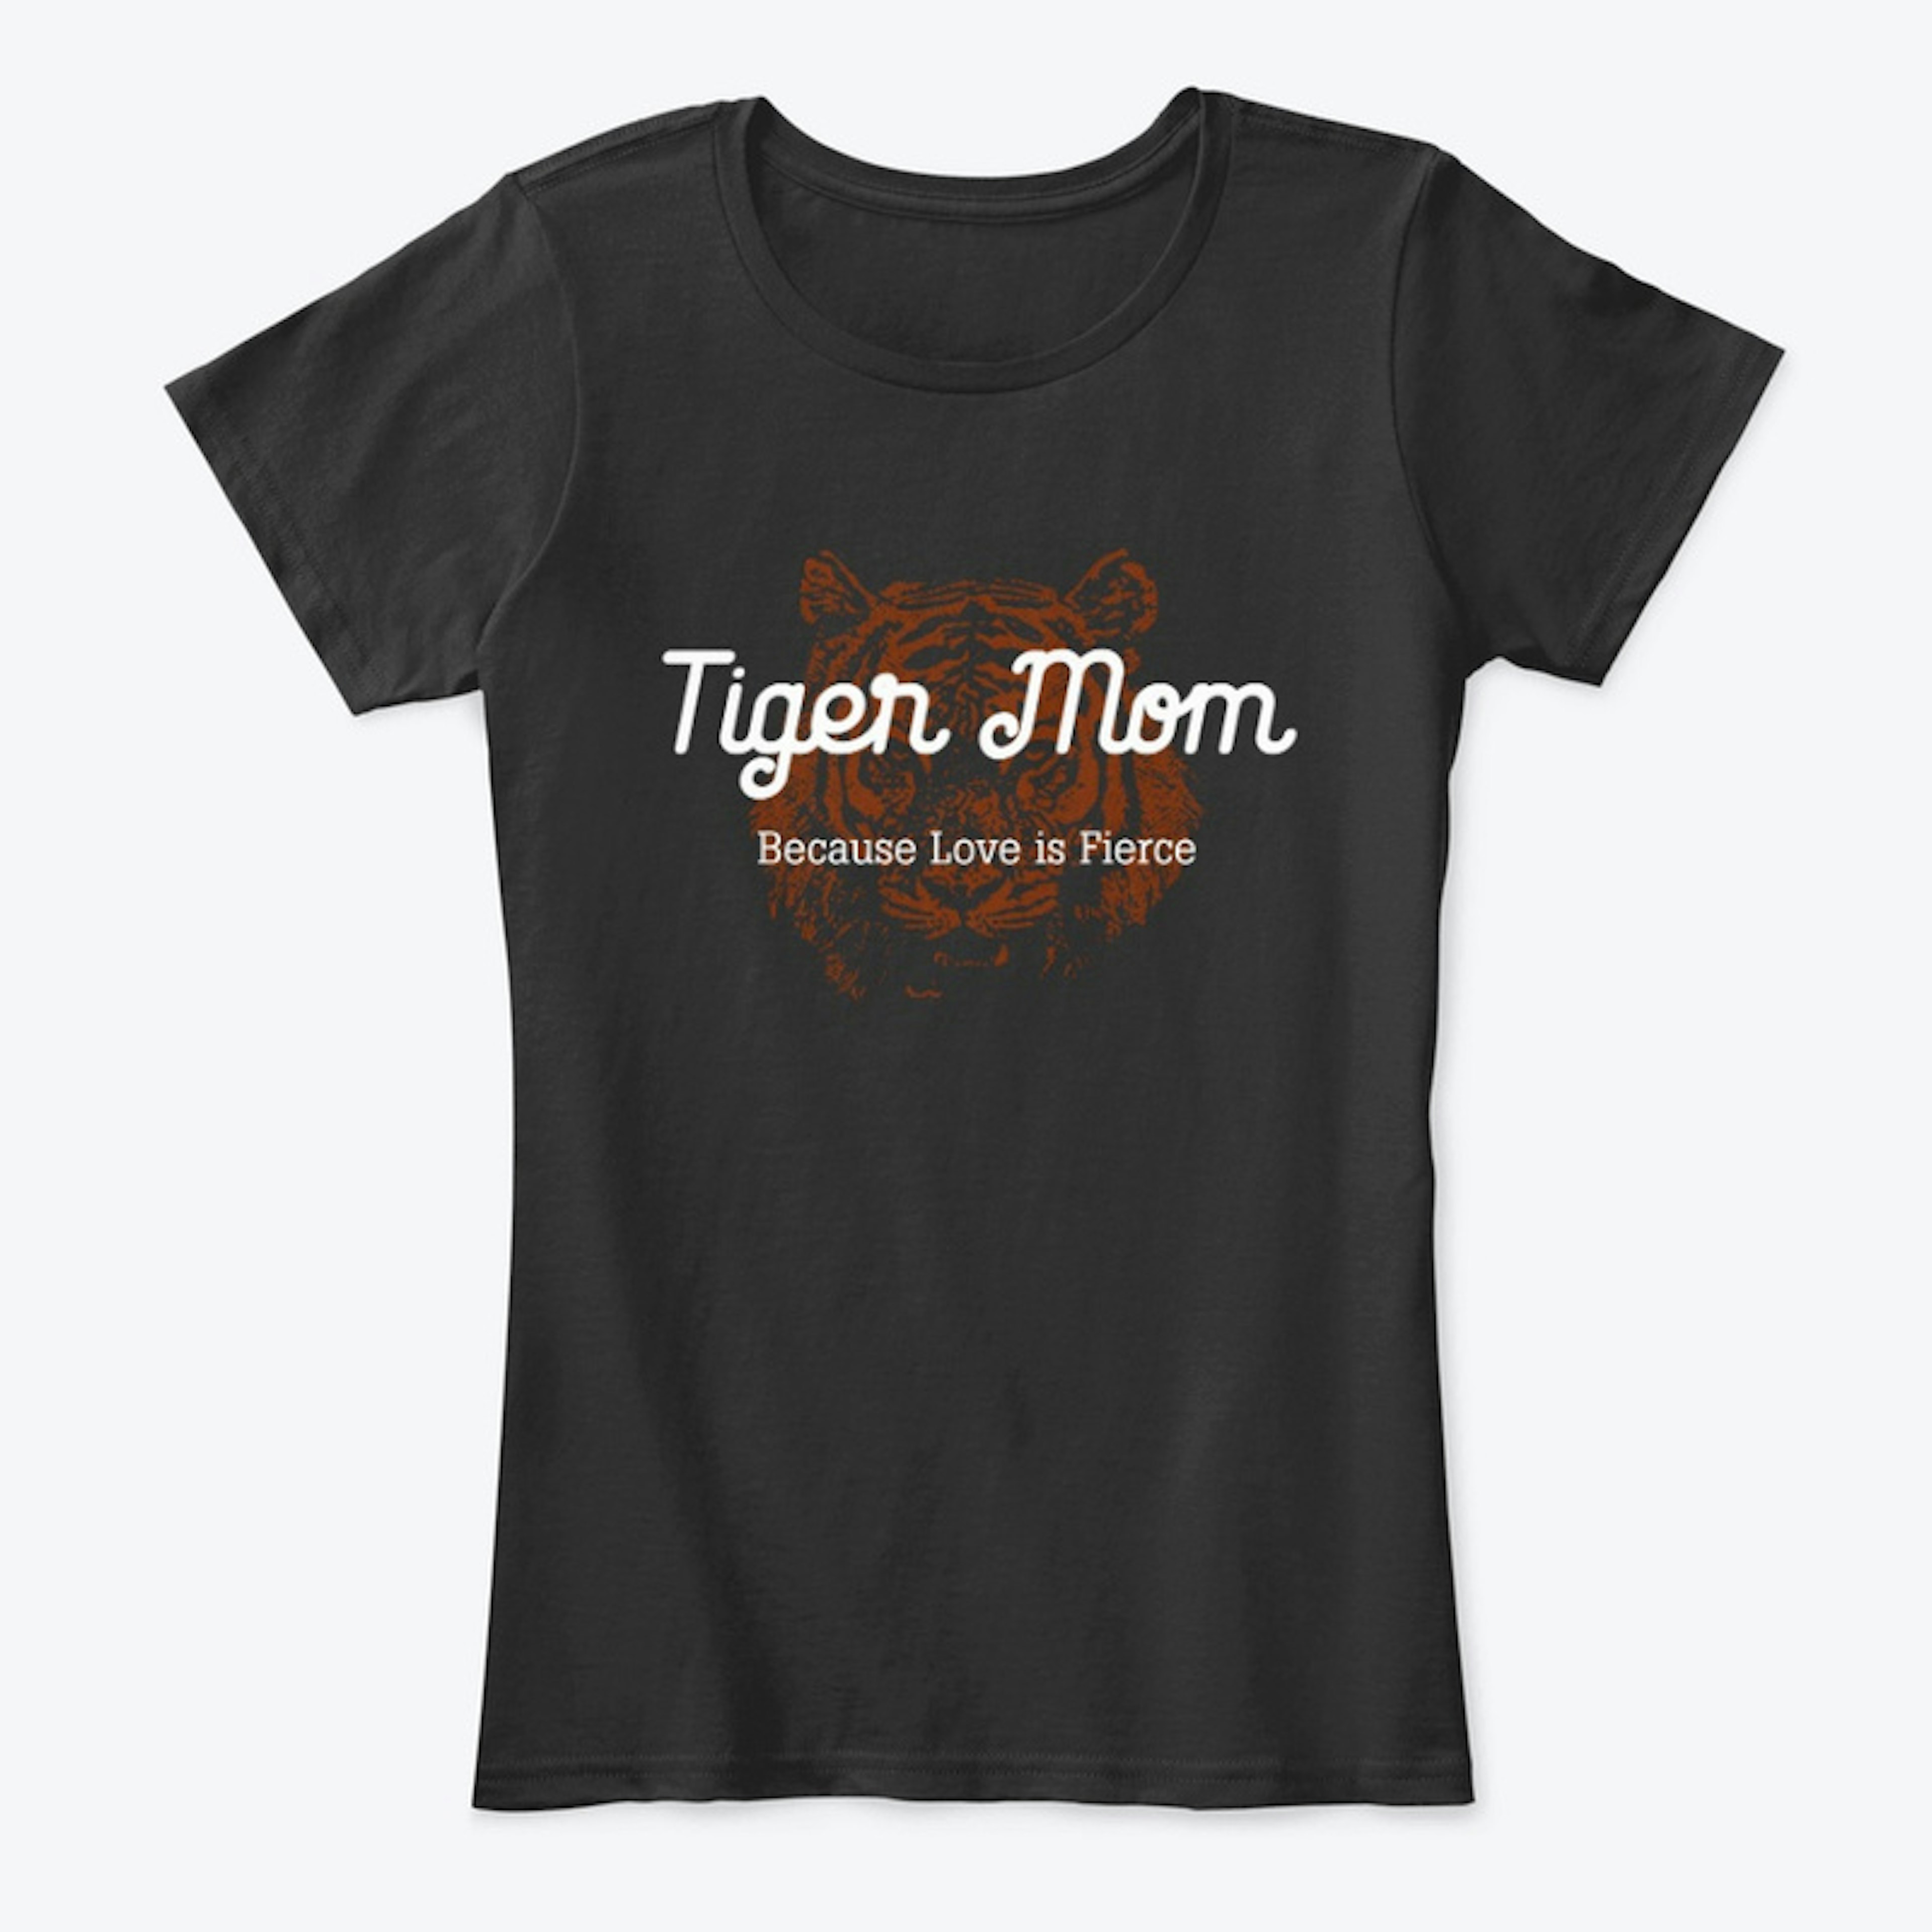 Tiger Mom Shirt for Fierce Mothers